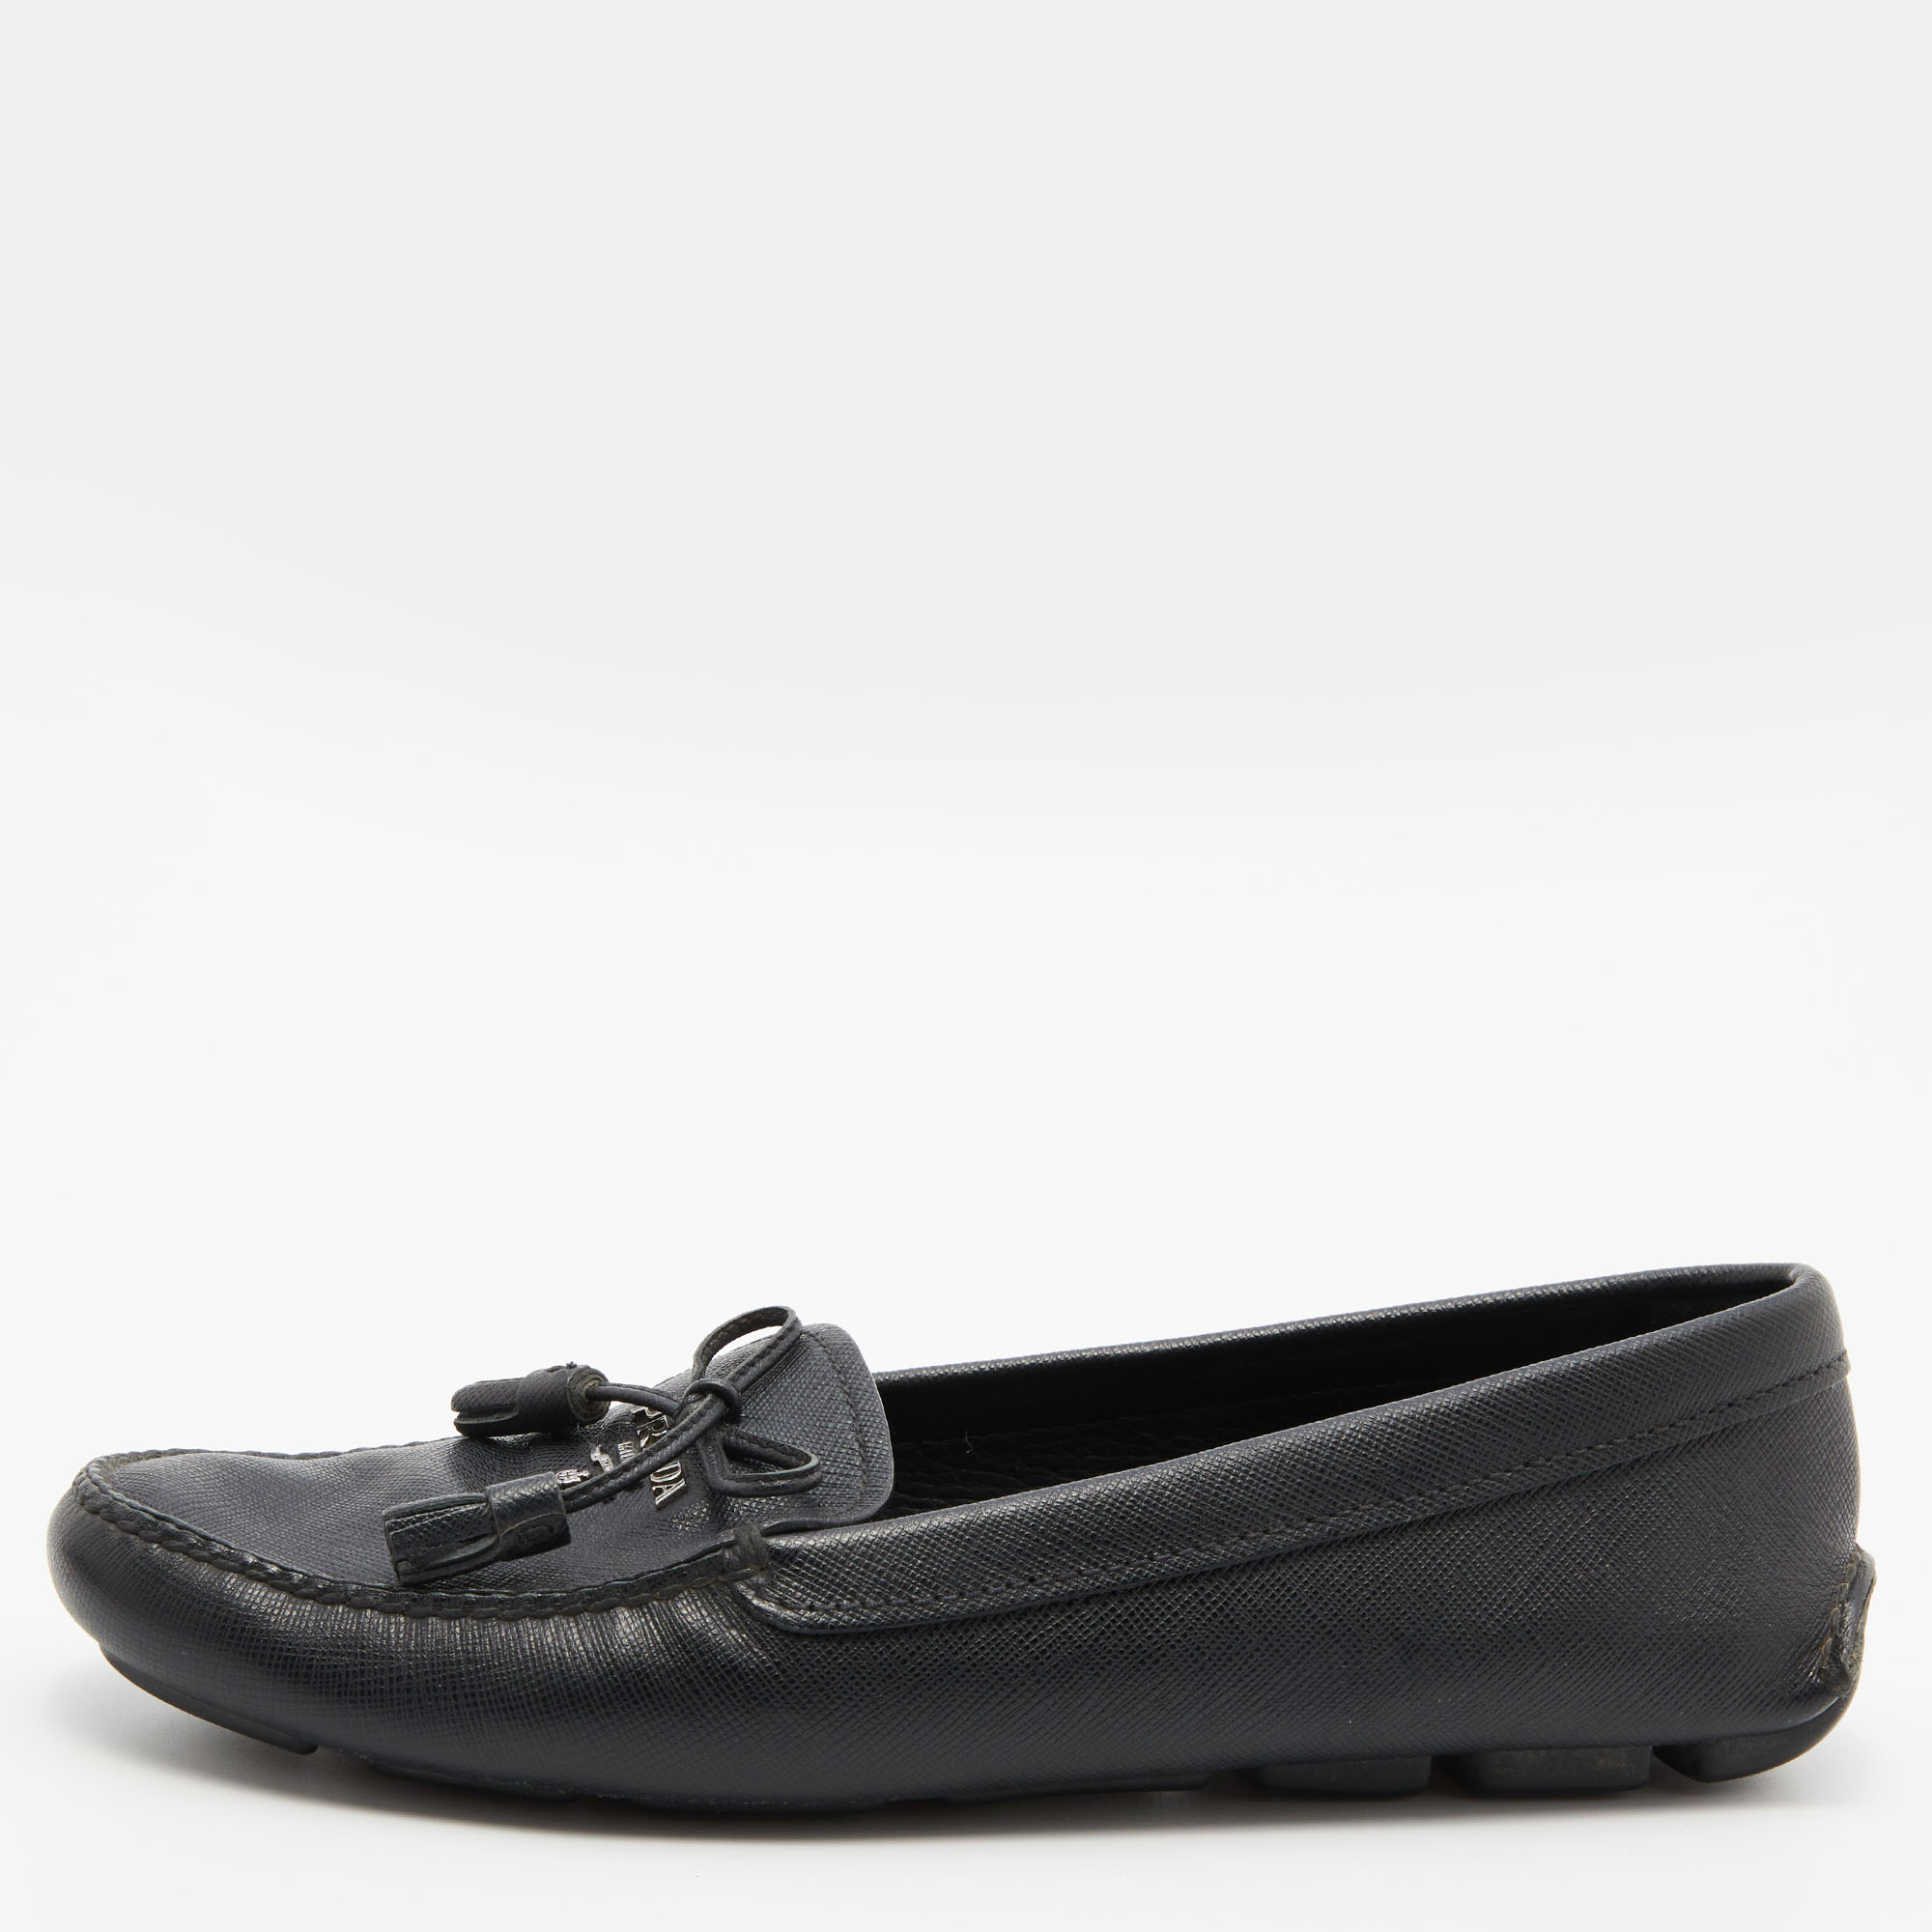 Pre-owned Prada Black Leather Bow Detail Loafers Size 38